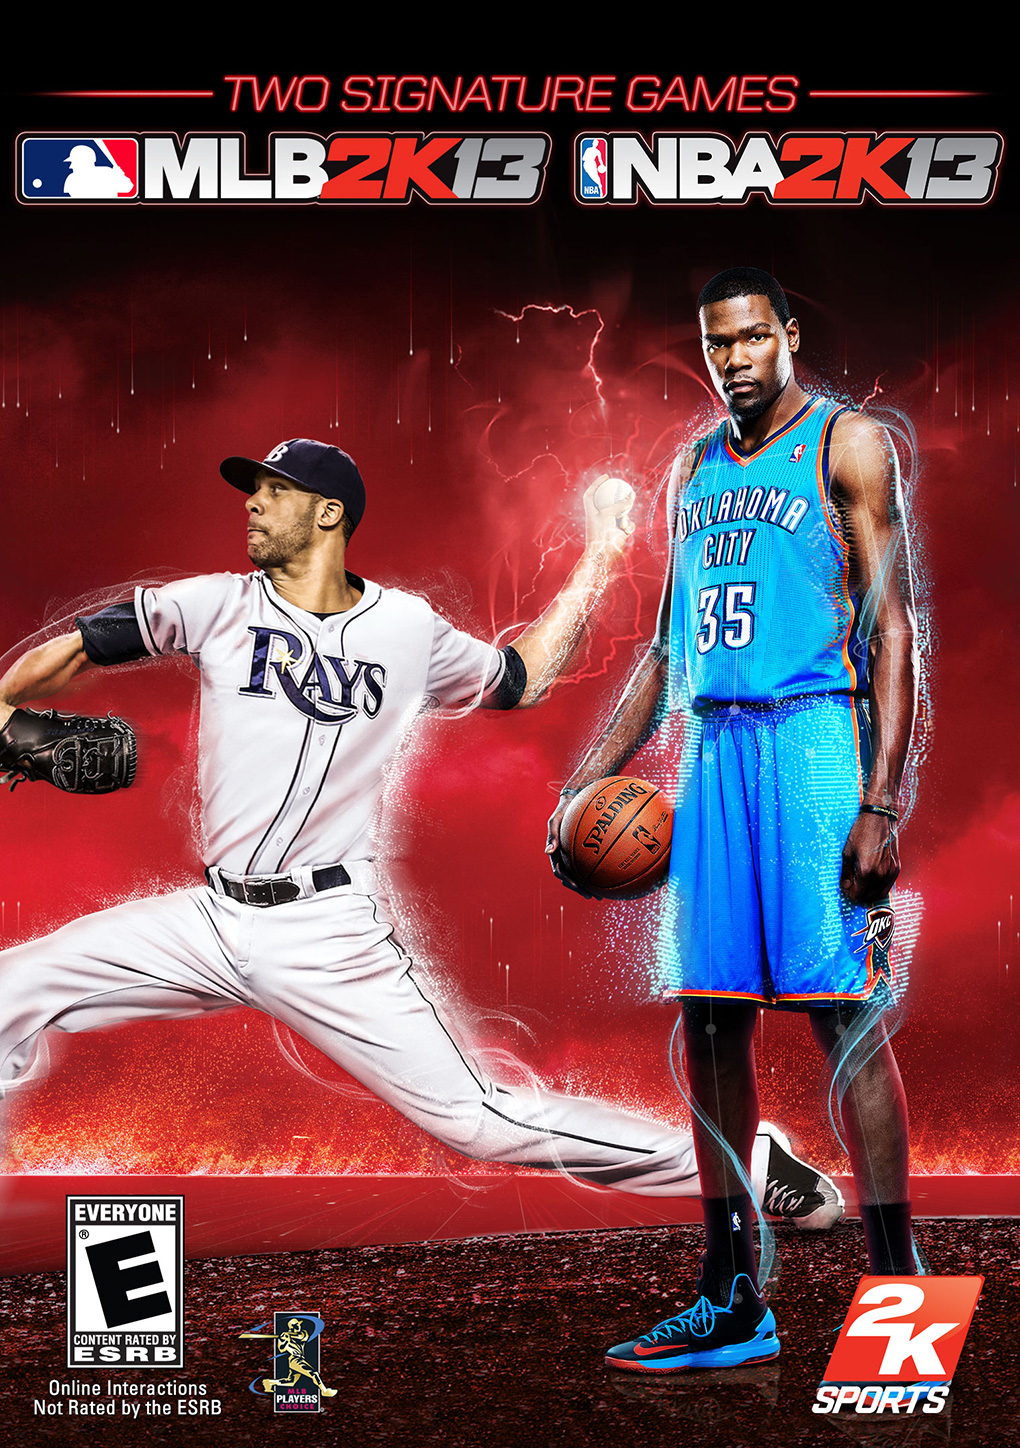 NBA 2K13/MLB 2K13 Combo Pack launching March 5 for 79.99